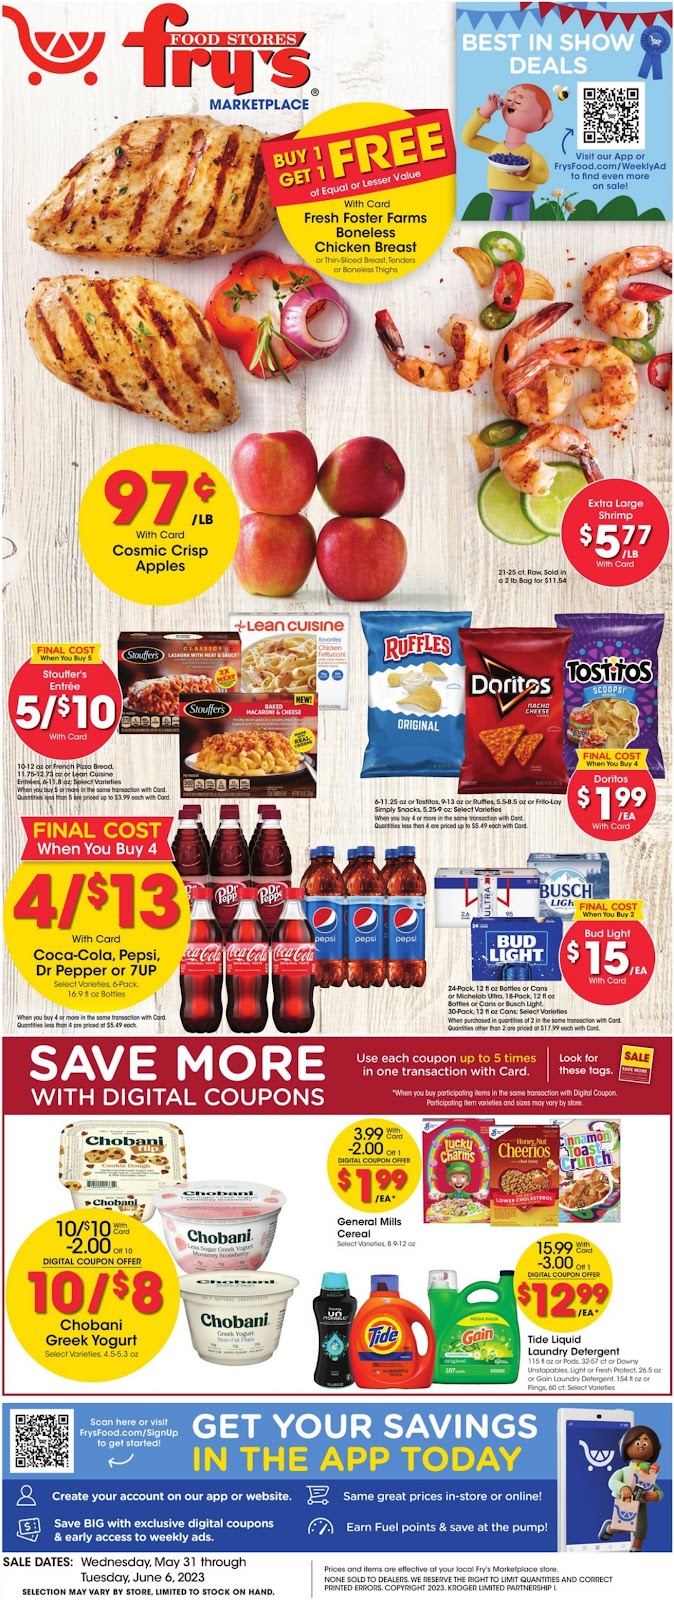 Fry's Weekly Ad - 1